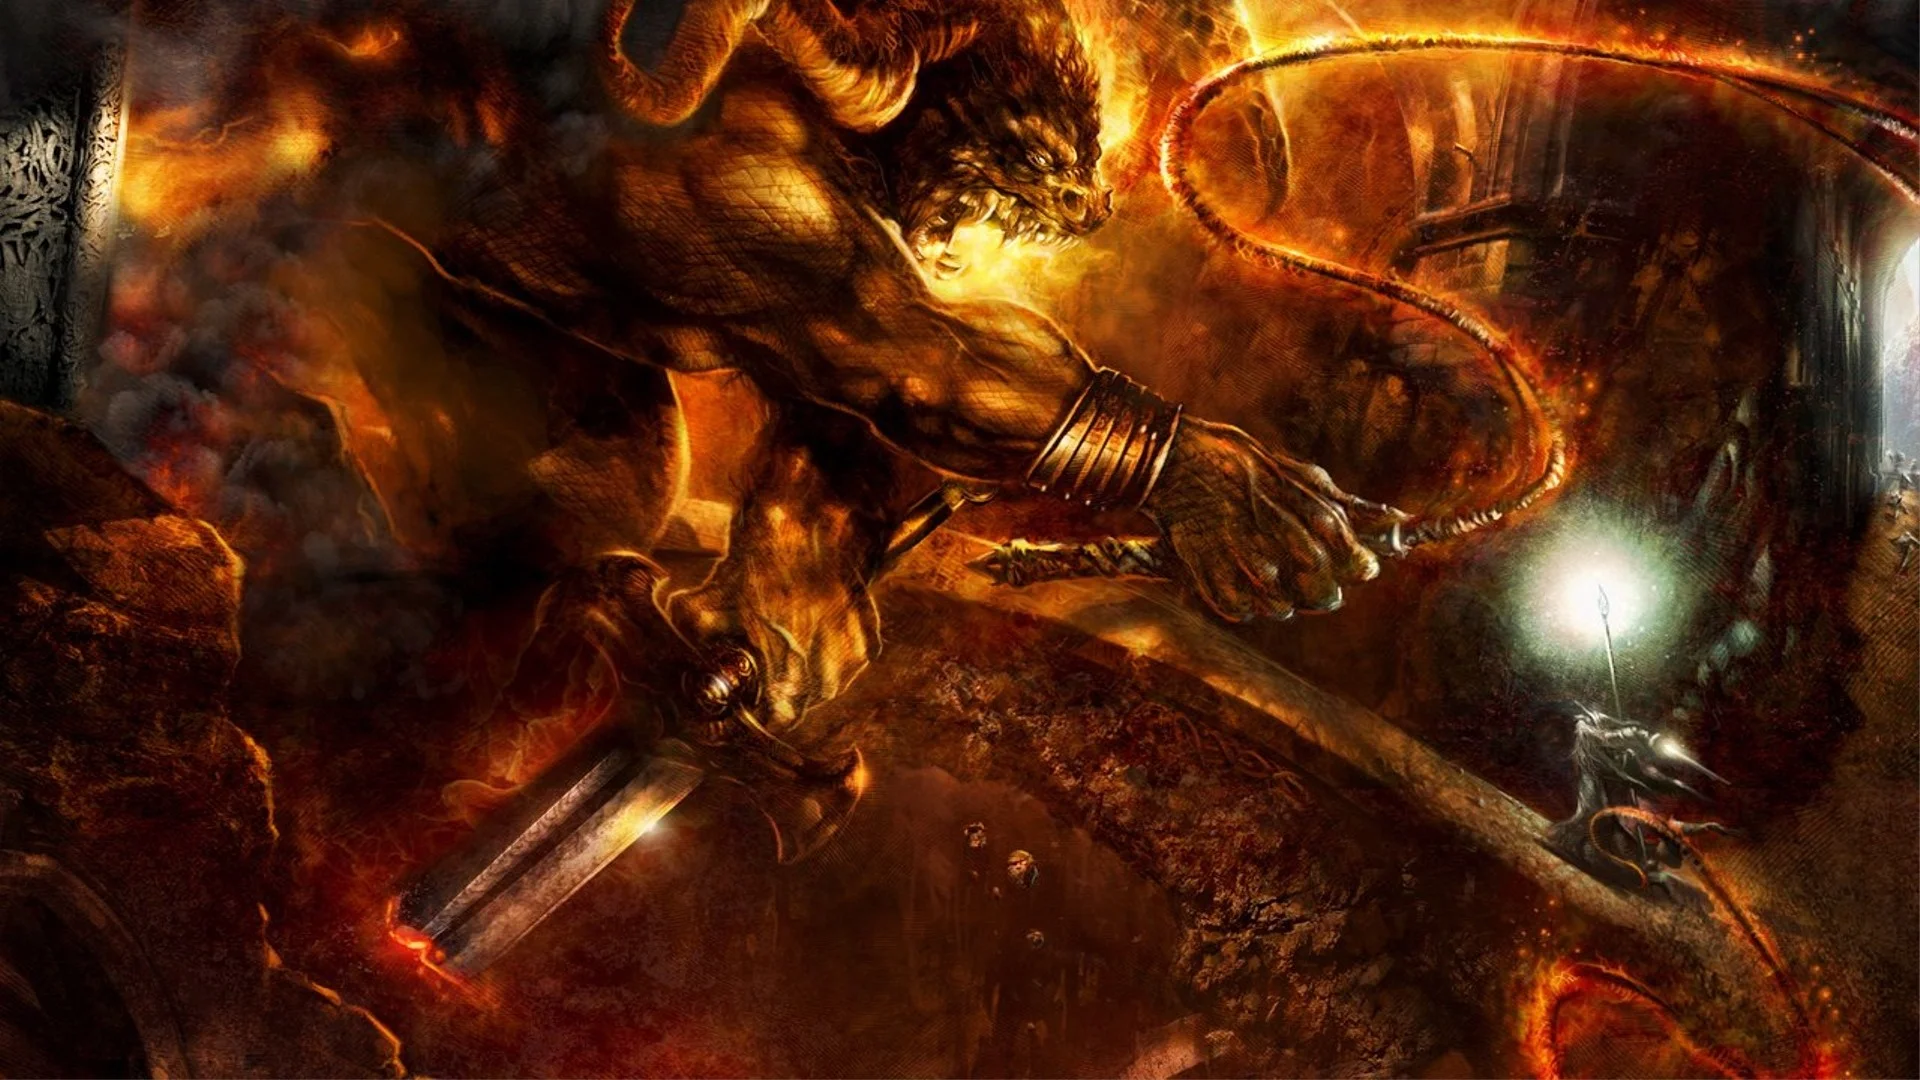 Gandalf Wallpaper Balrog, Gandalf, The, Lord, Of, The, Rings